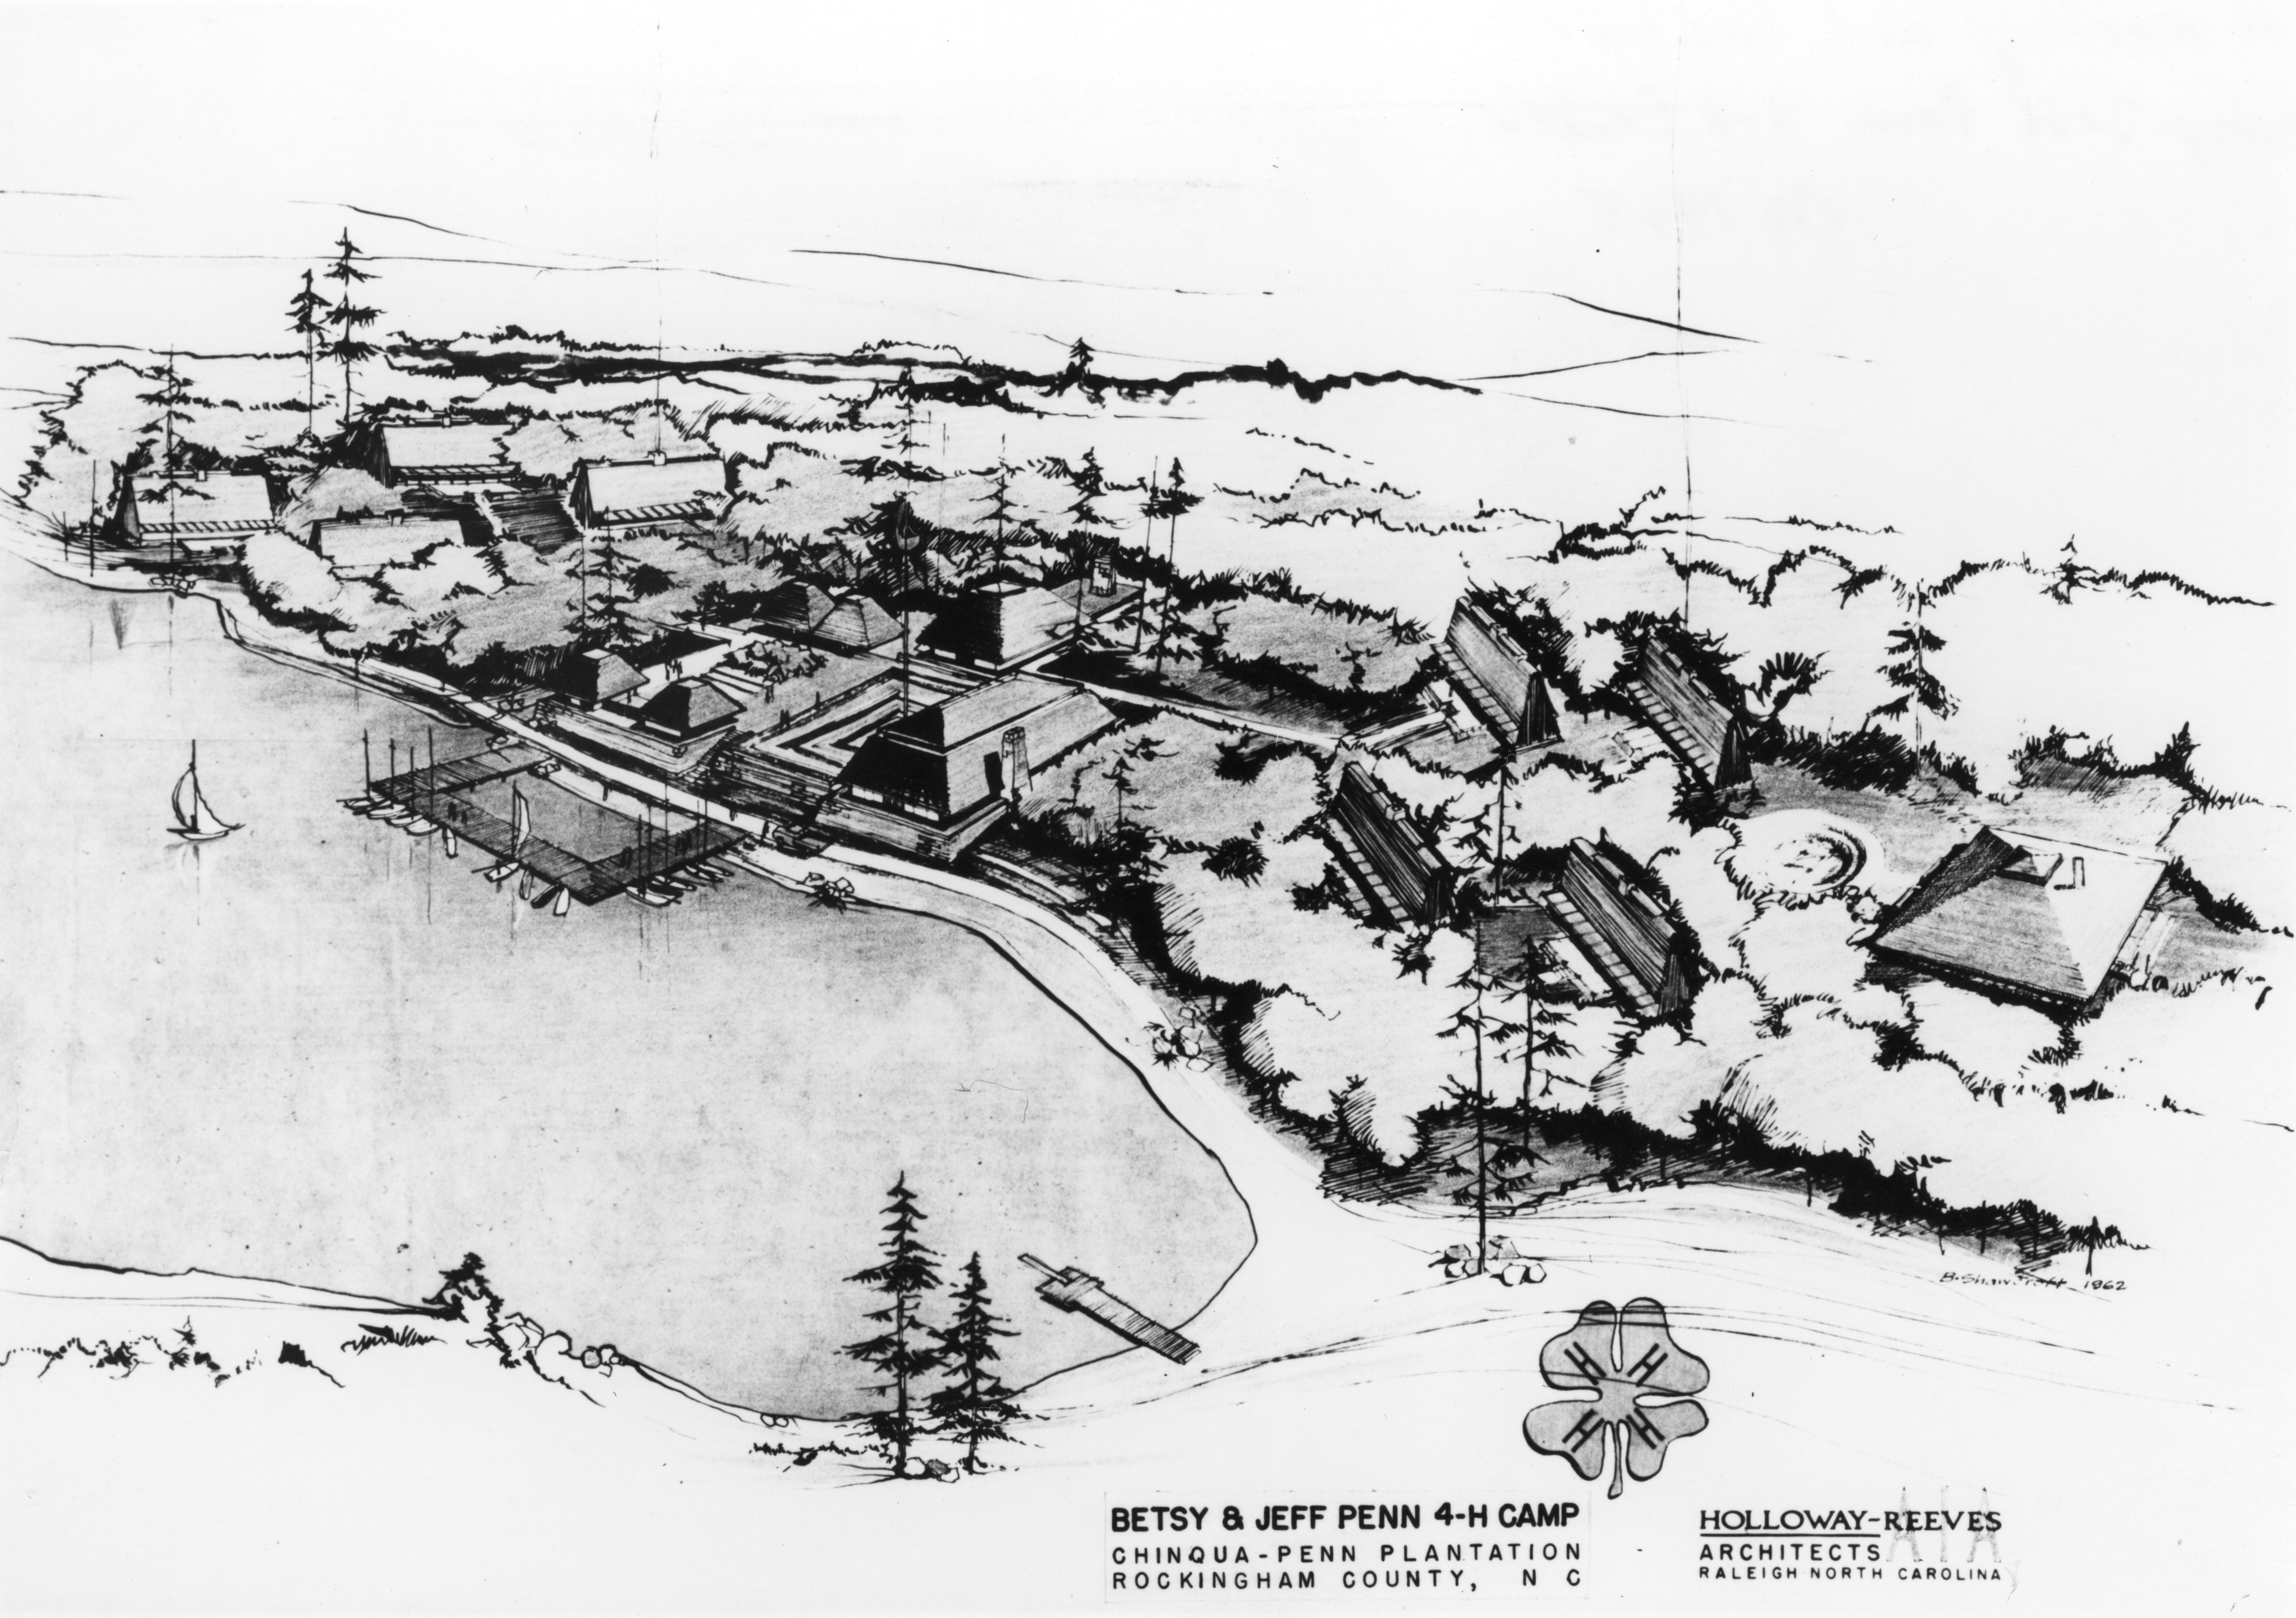 Aerial drawing of the Betsy & Jeff Penn 4-H Educational Center facilities, circa 1965.